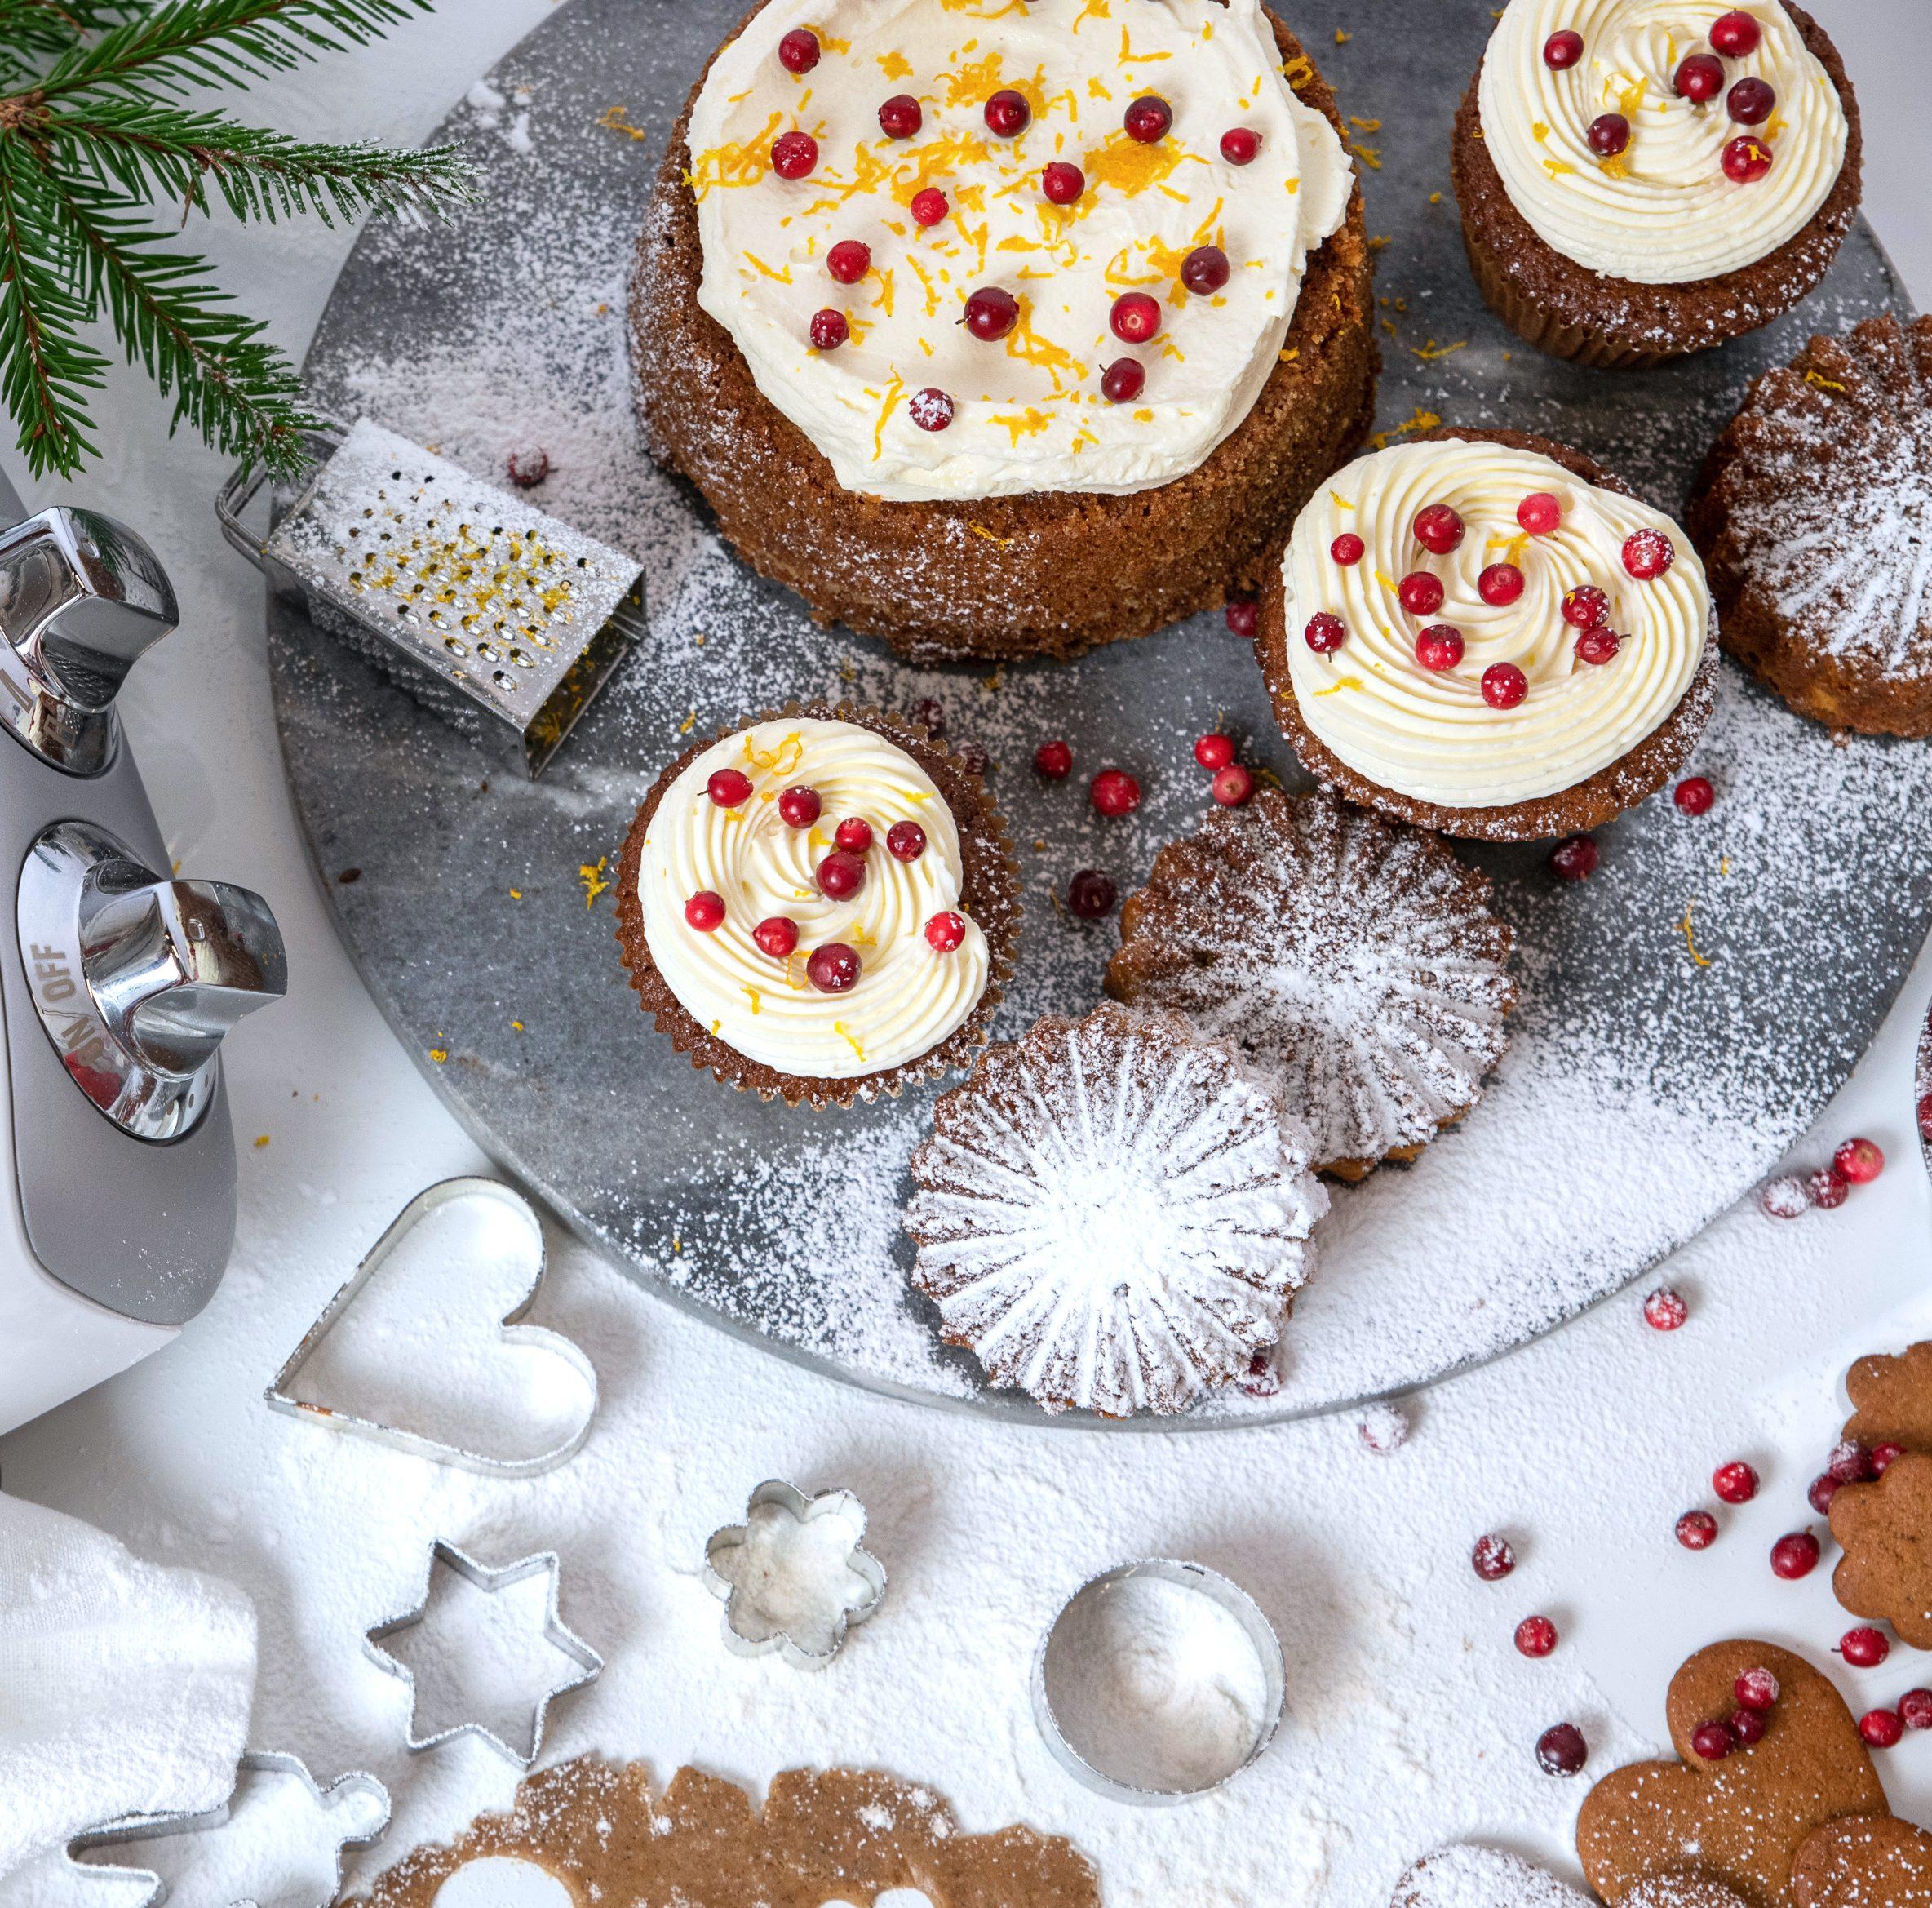 A tray of Homemade Christmas Cakes with Icing